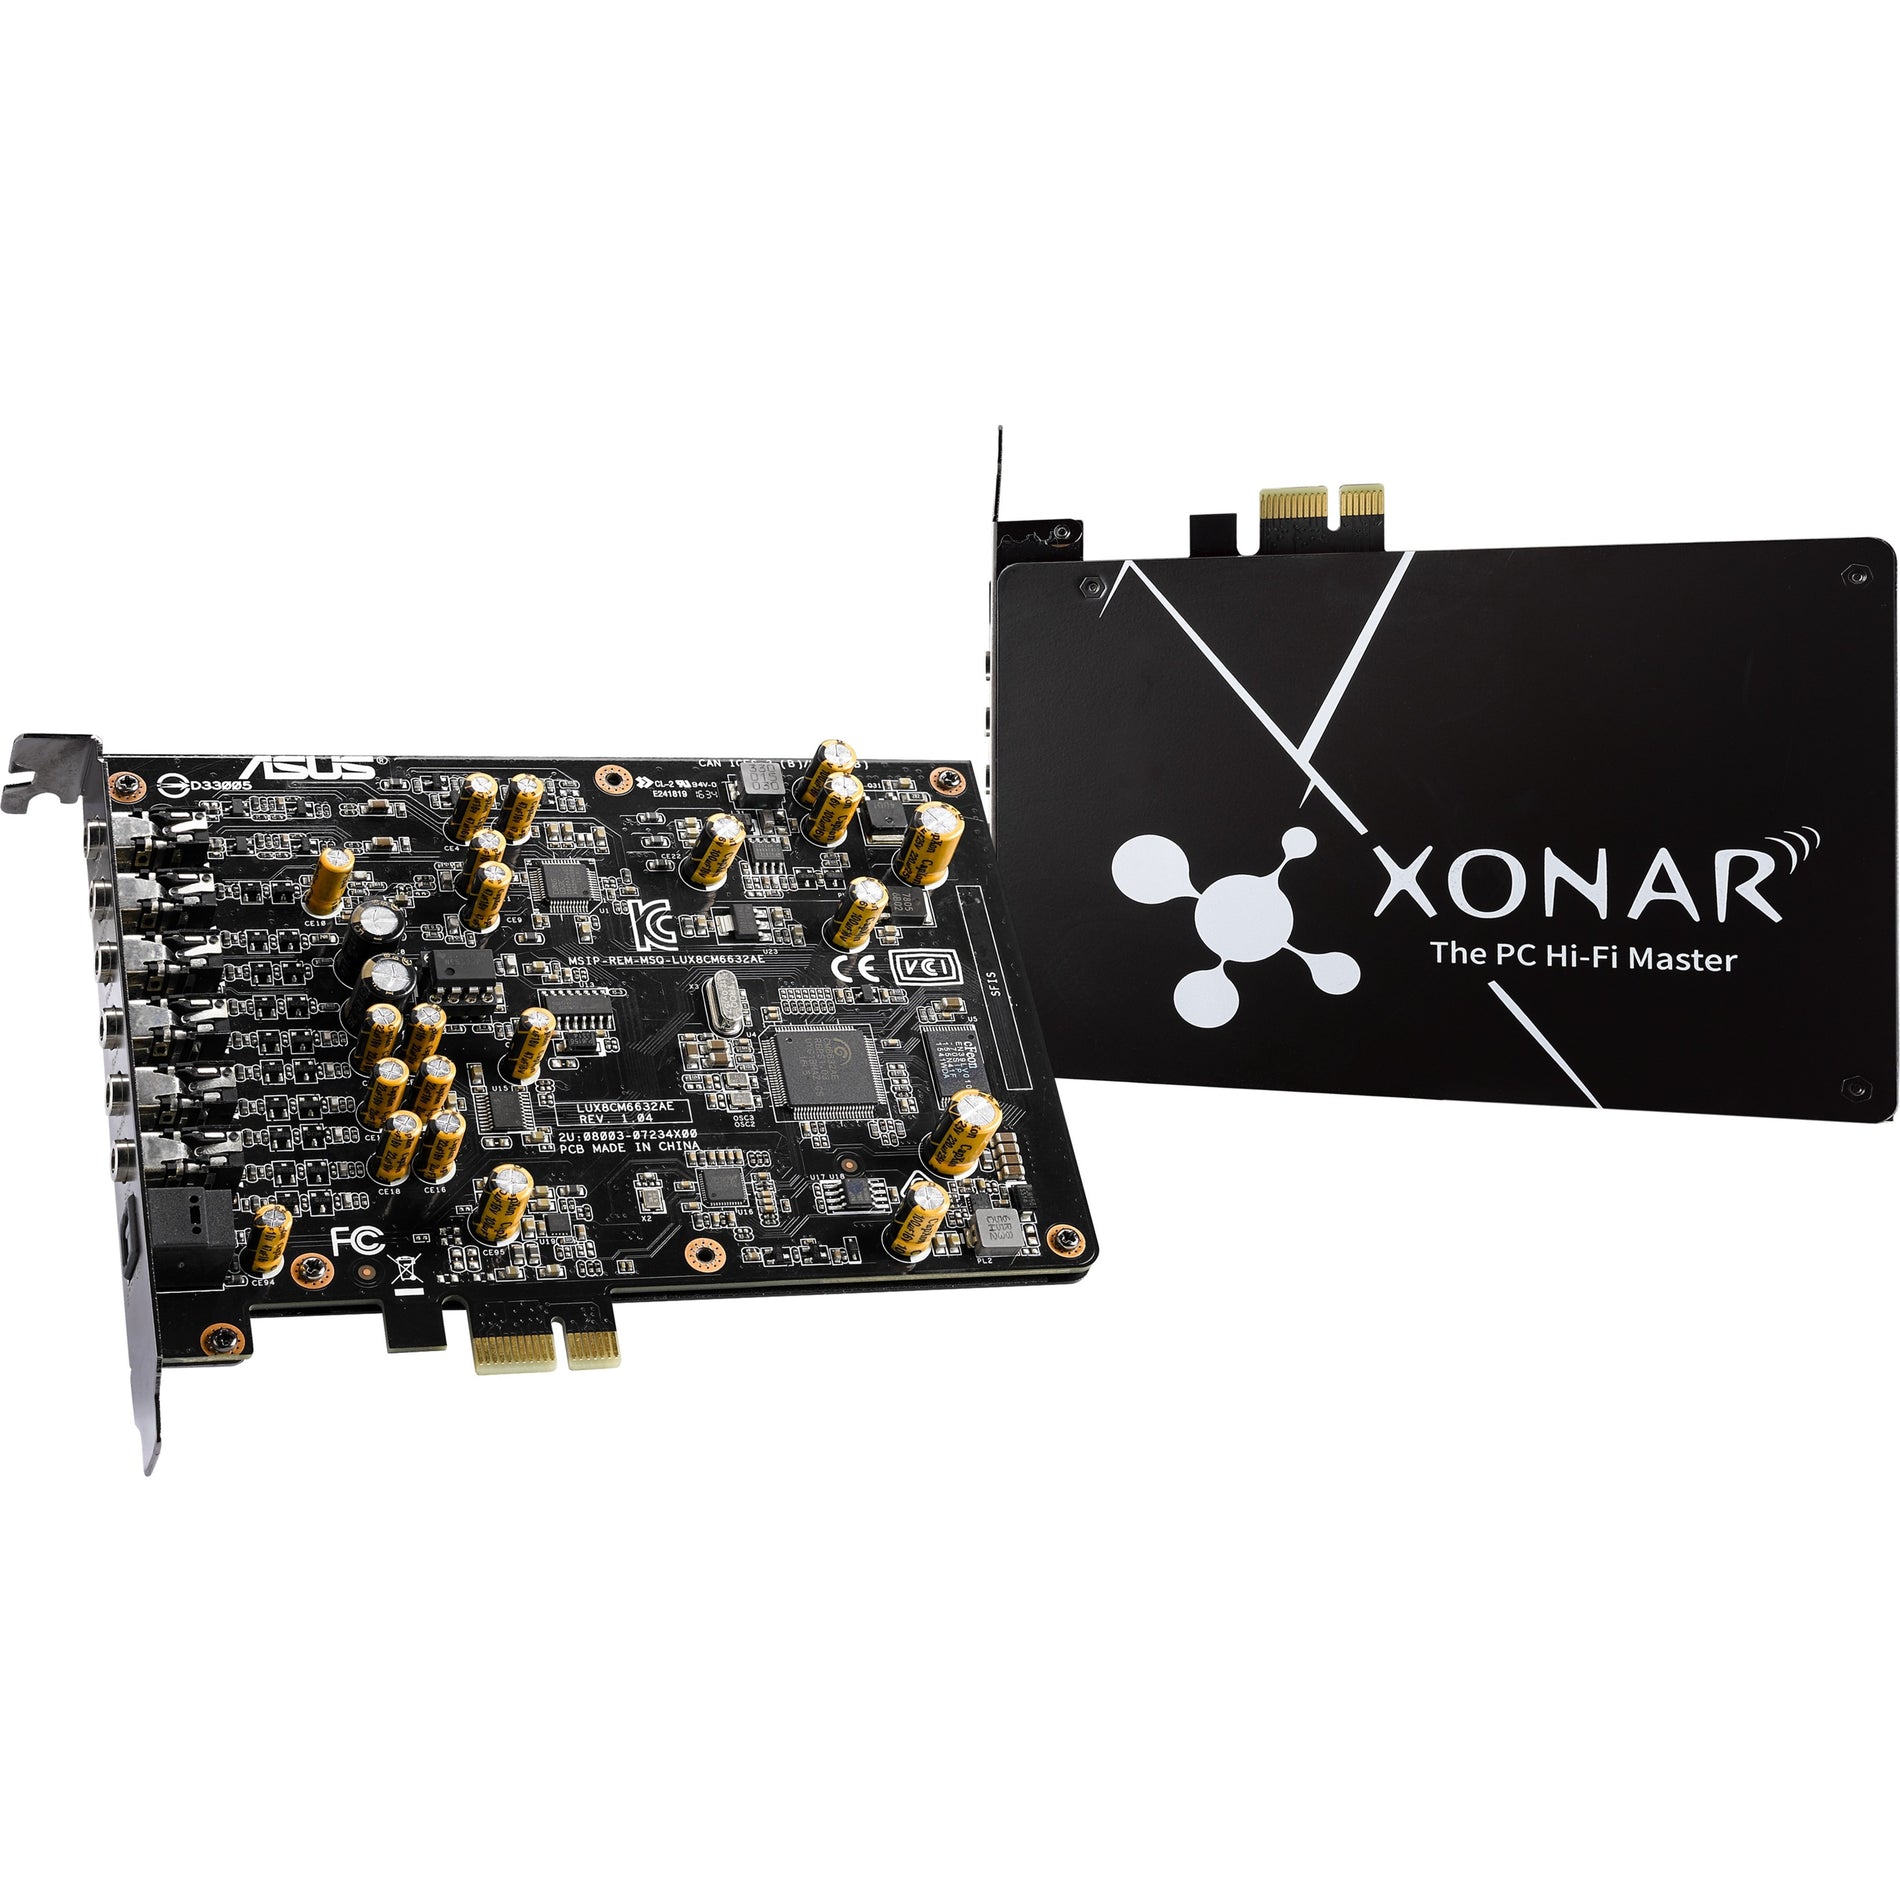 Asus XONAR AE PCIe 7.1 Gaming Audio Card, Enhanced Sound Quality for Immersive Gaming Experience